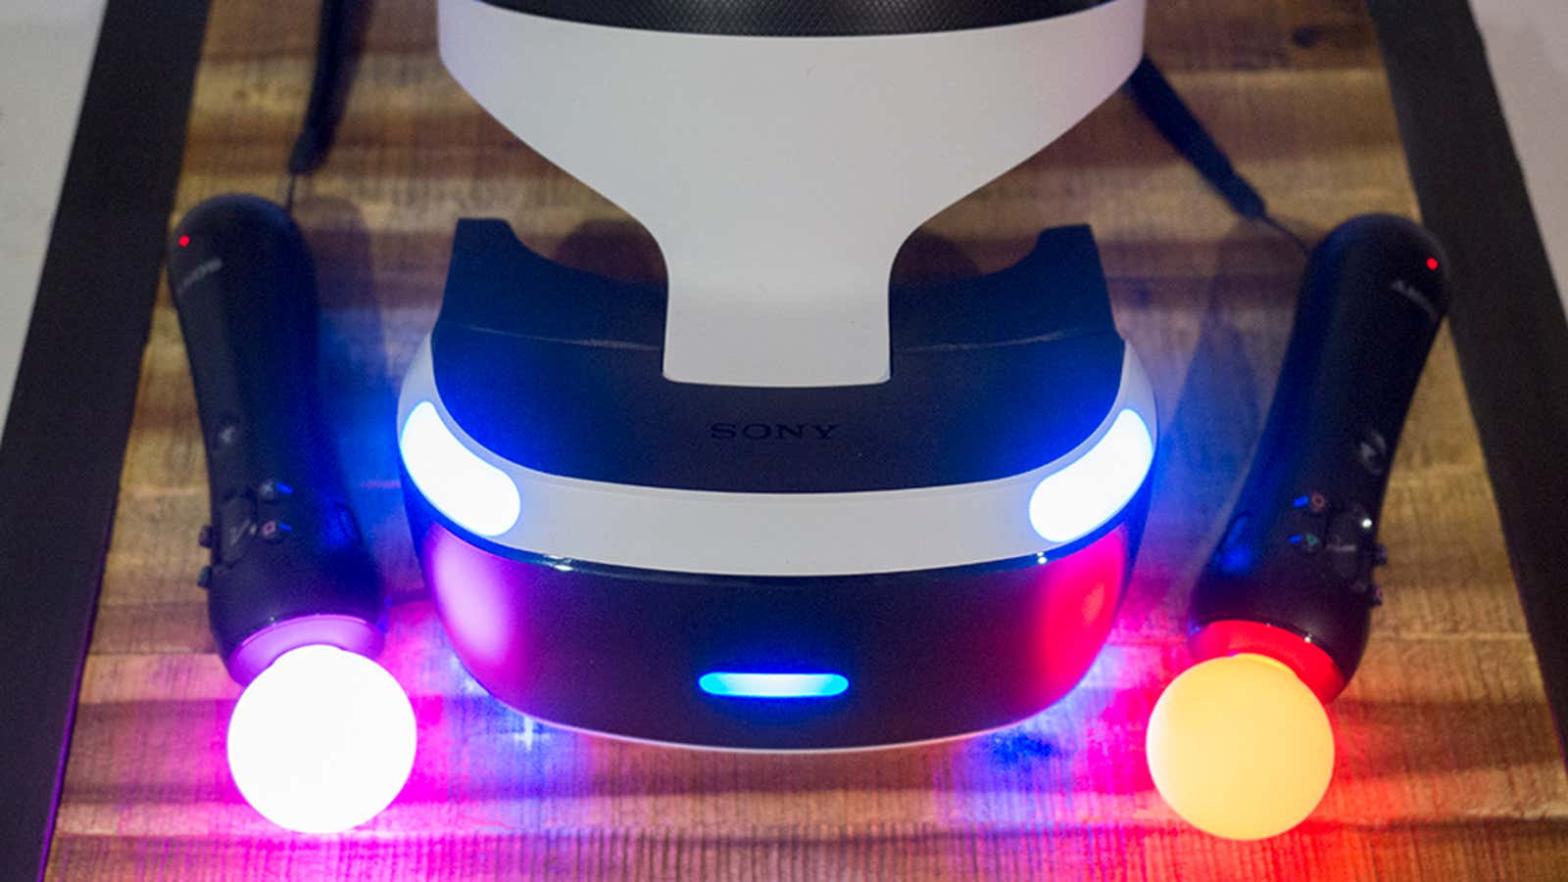 Based on reports and previously announced info, Sony's next-gen VR headset is poised to be a major upgrade from the original PSVR (seen here). (Photo: Alex Cranz)